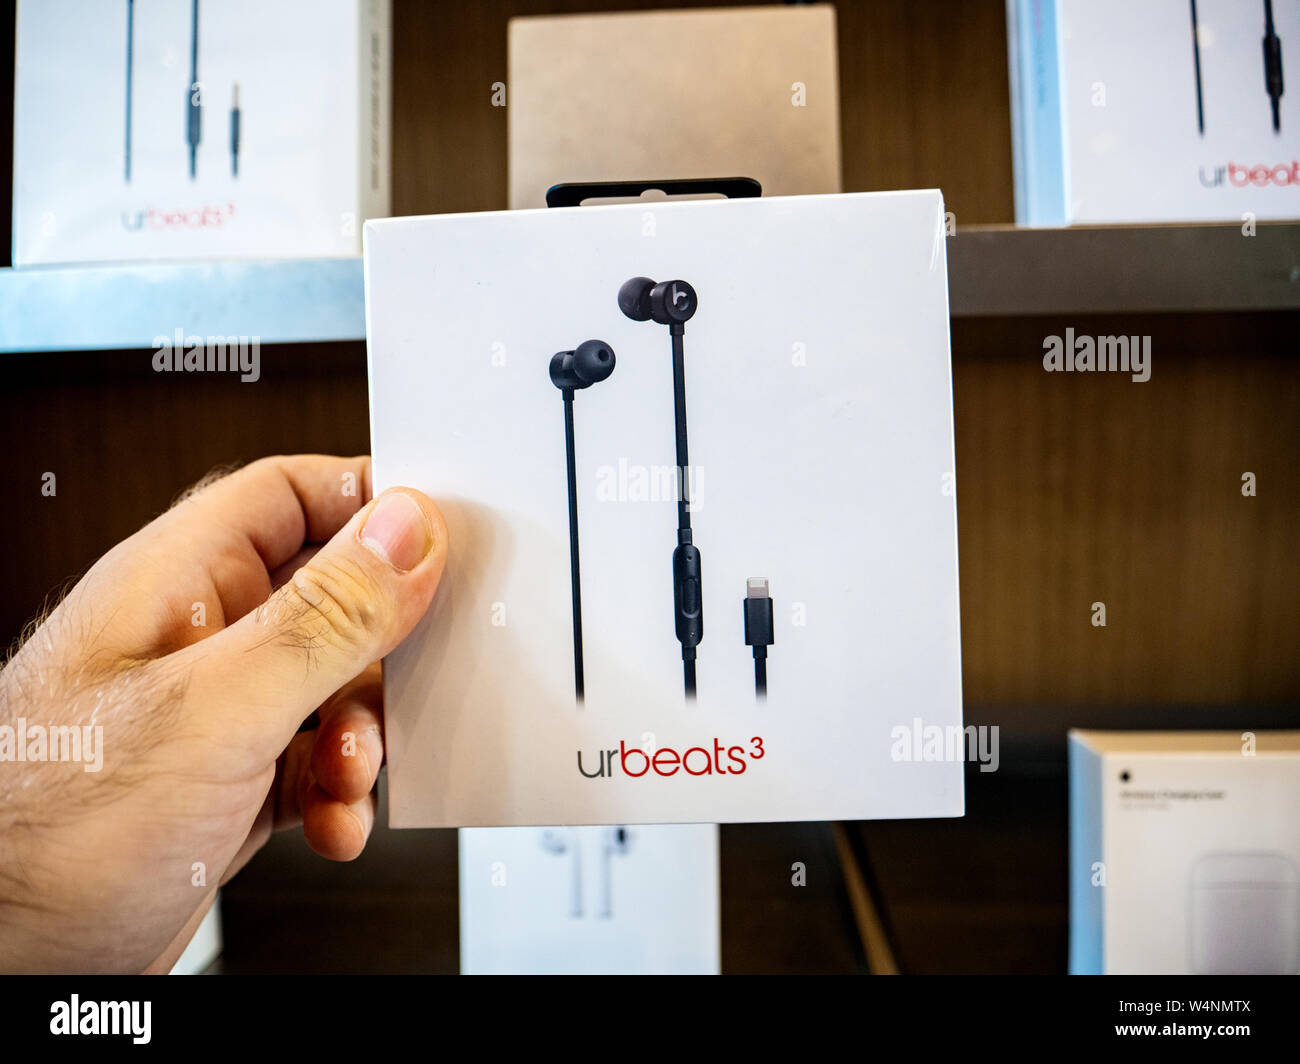 Paris, France - Jul 24, 2019: Man POV personal perspective inside Apple Store at the new Apple URBeats 3 shopping for new headphones Stock Photo